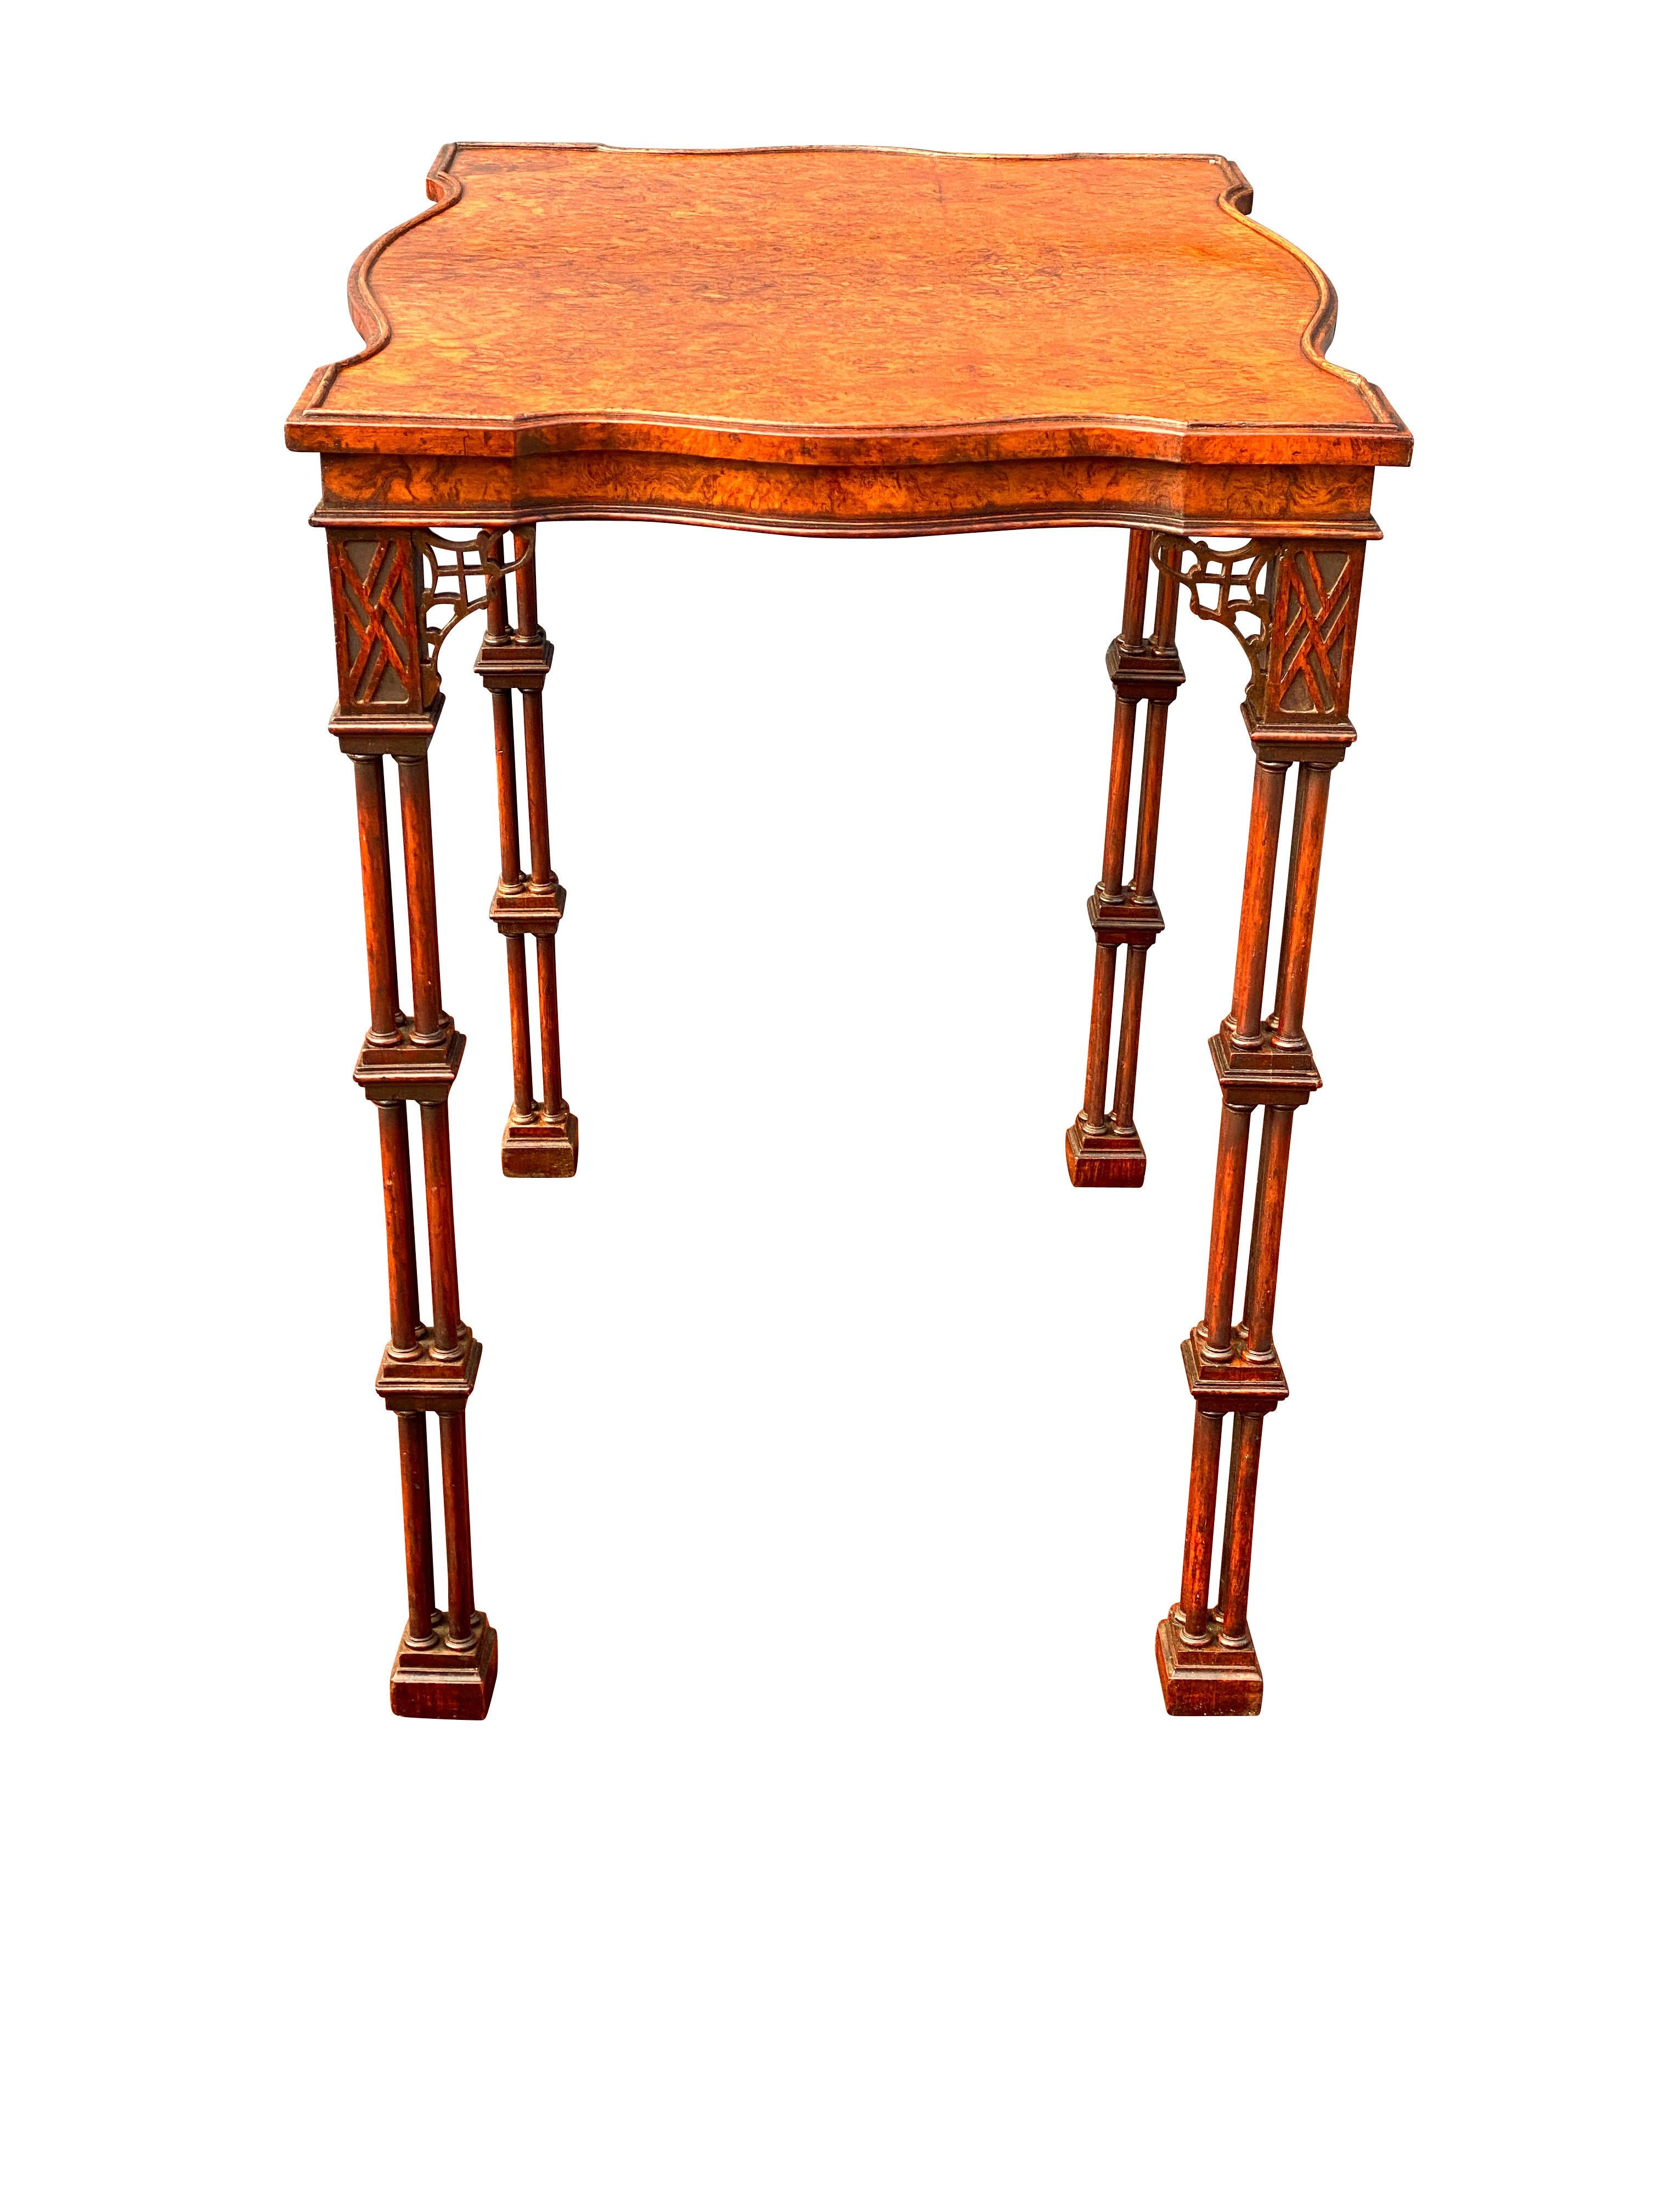 Chinese Chippendale George III Style Burl Walnut and Mahogany China Table Attributed to Gillow For Sale